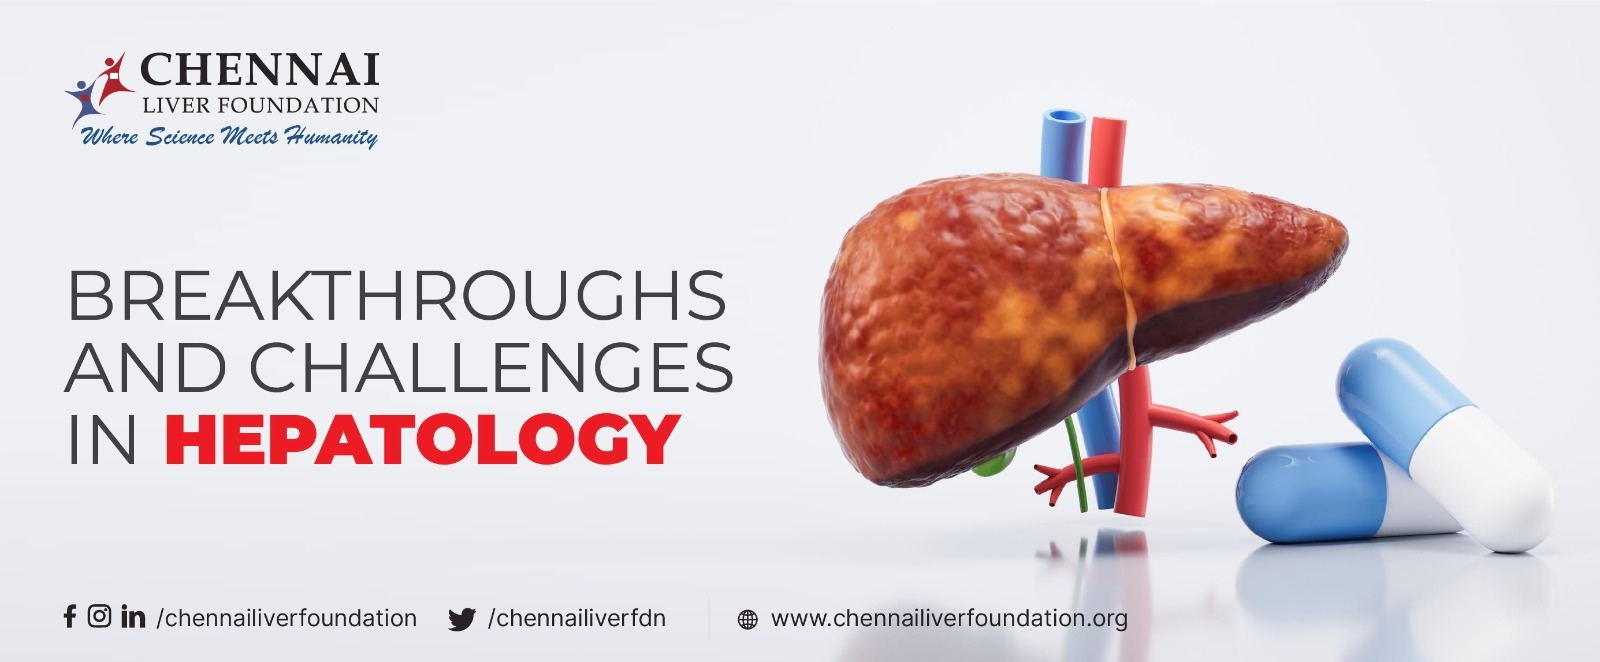 Breakthroughs And Challenges in Hepatology